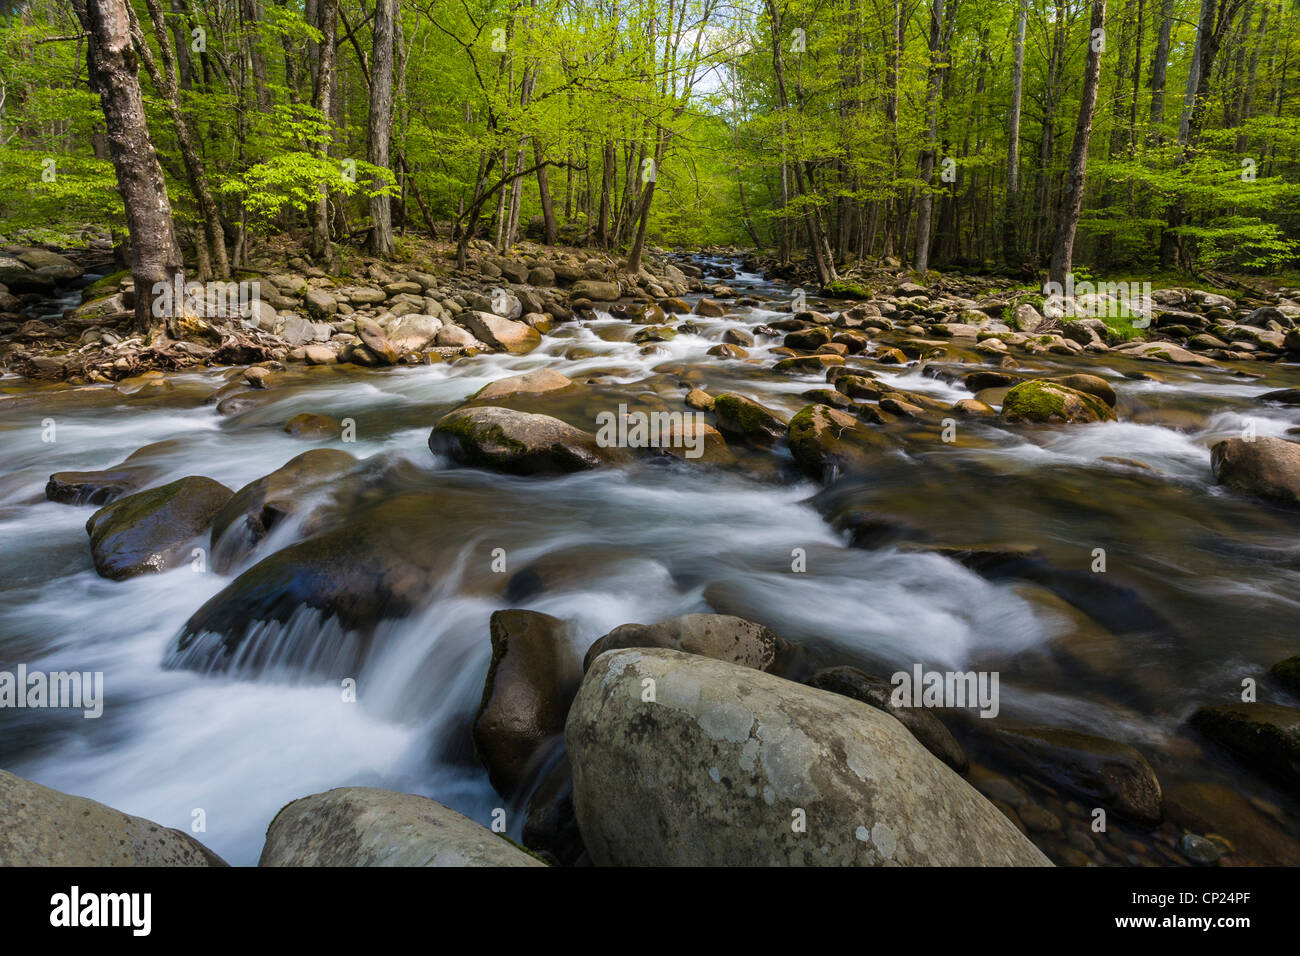 Spring on the Middle Prong of the Little Pigeon River in the Greenbrier area of the Great Smoky Mountains National Park in Tenn Stock Photo